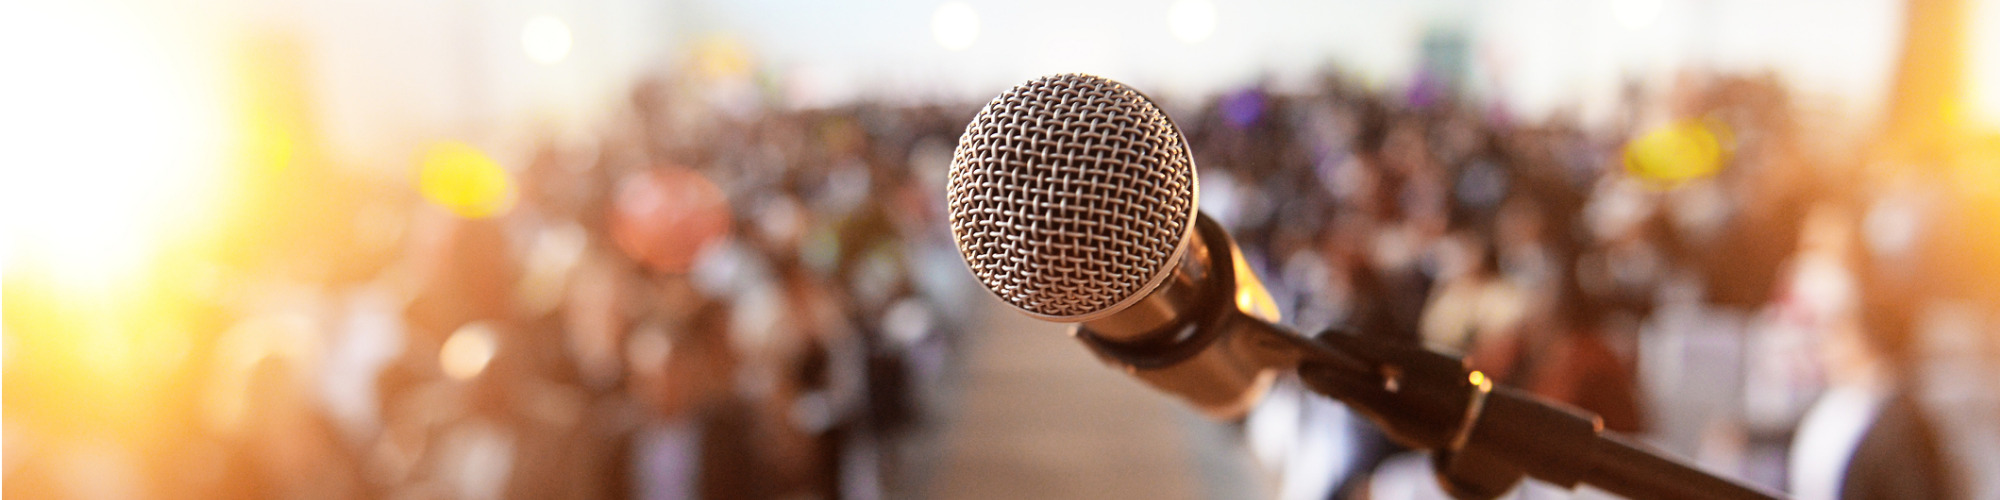 Public Speaking & Presenting Skills - How to Conquer Your Nerves 